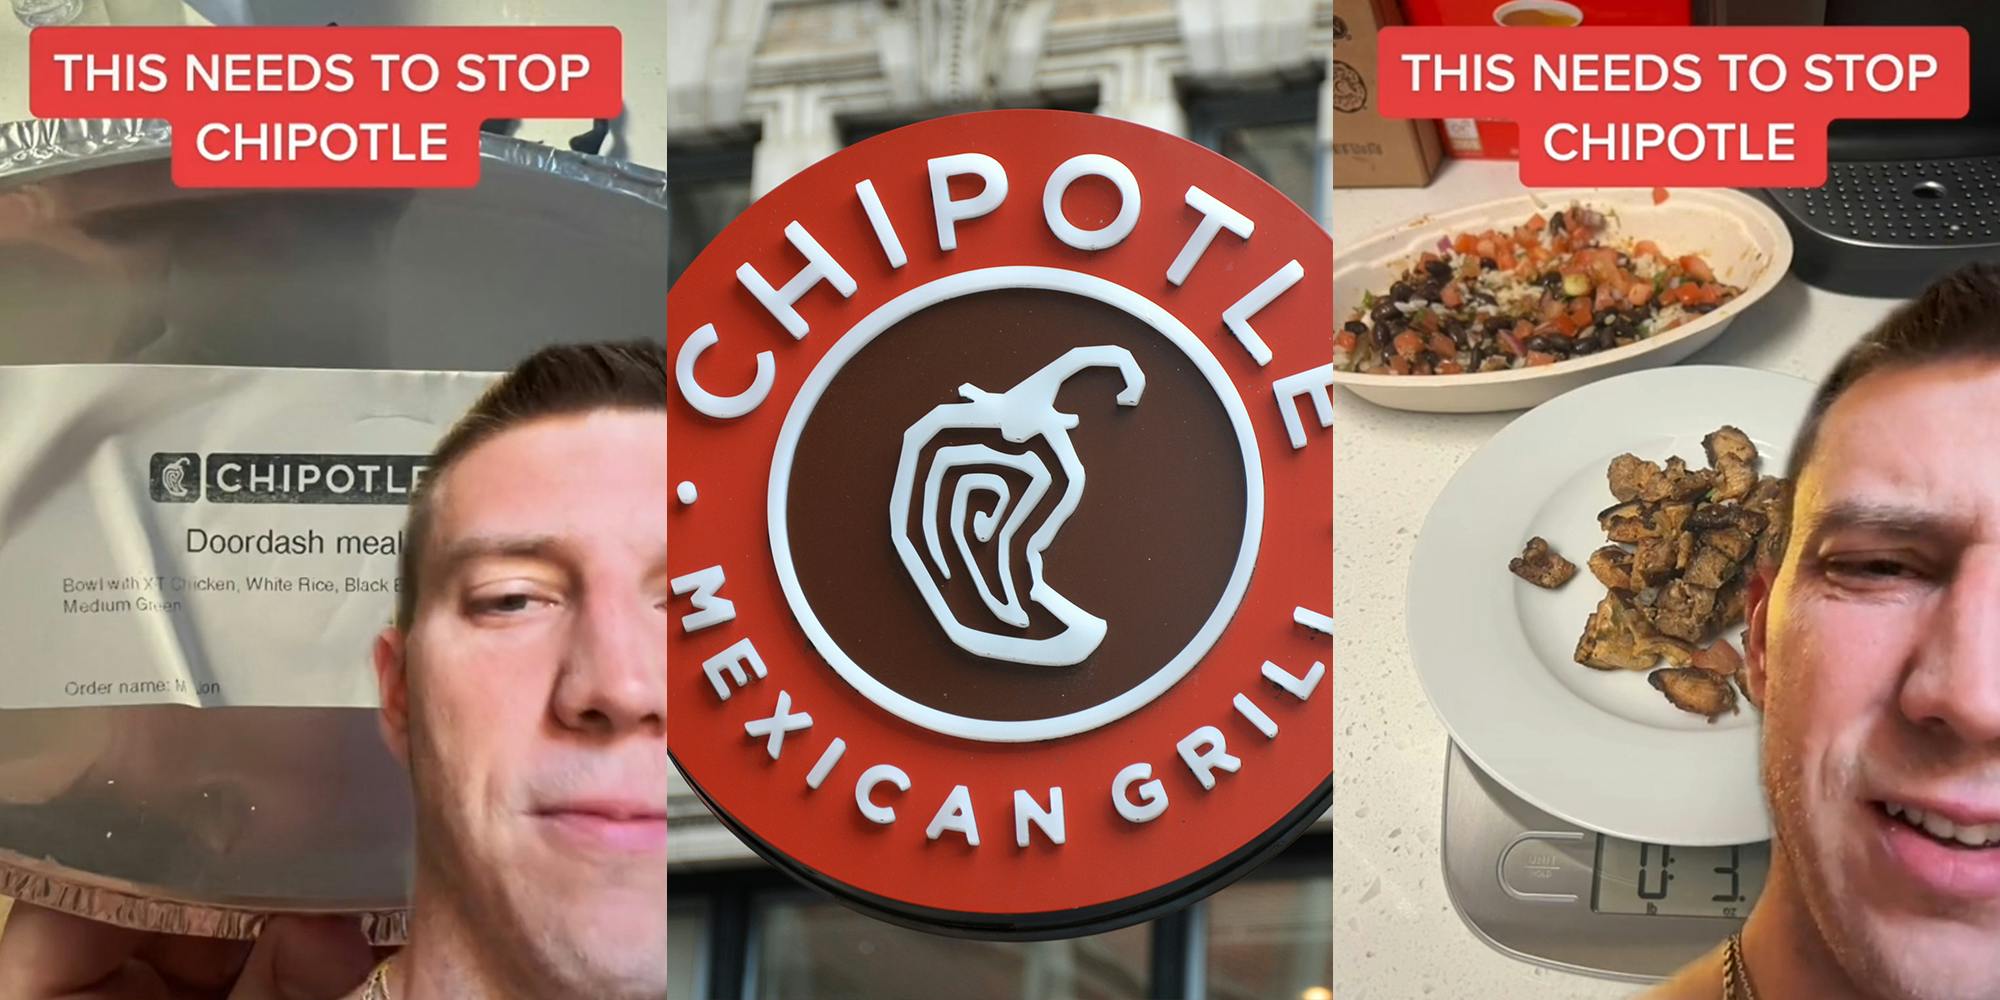 Chipotle Customer Weighs Portion After Ordering Double-Chicken Bowl